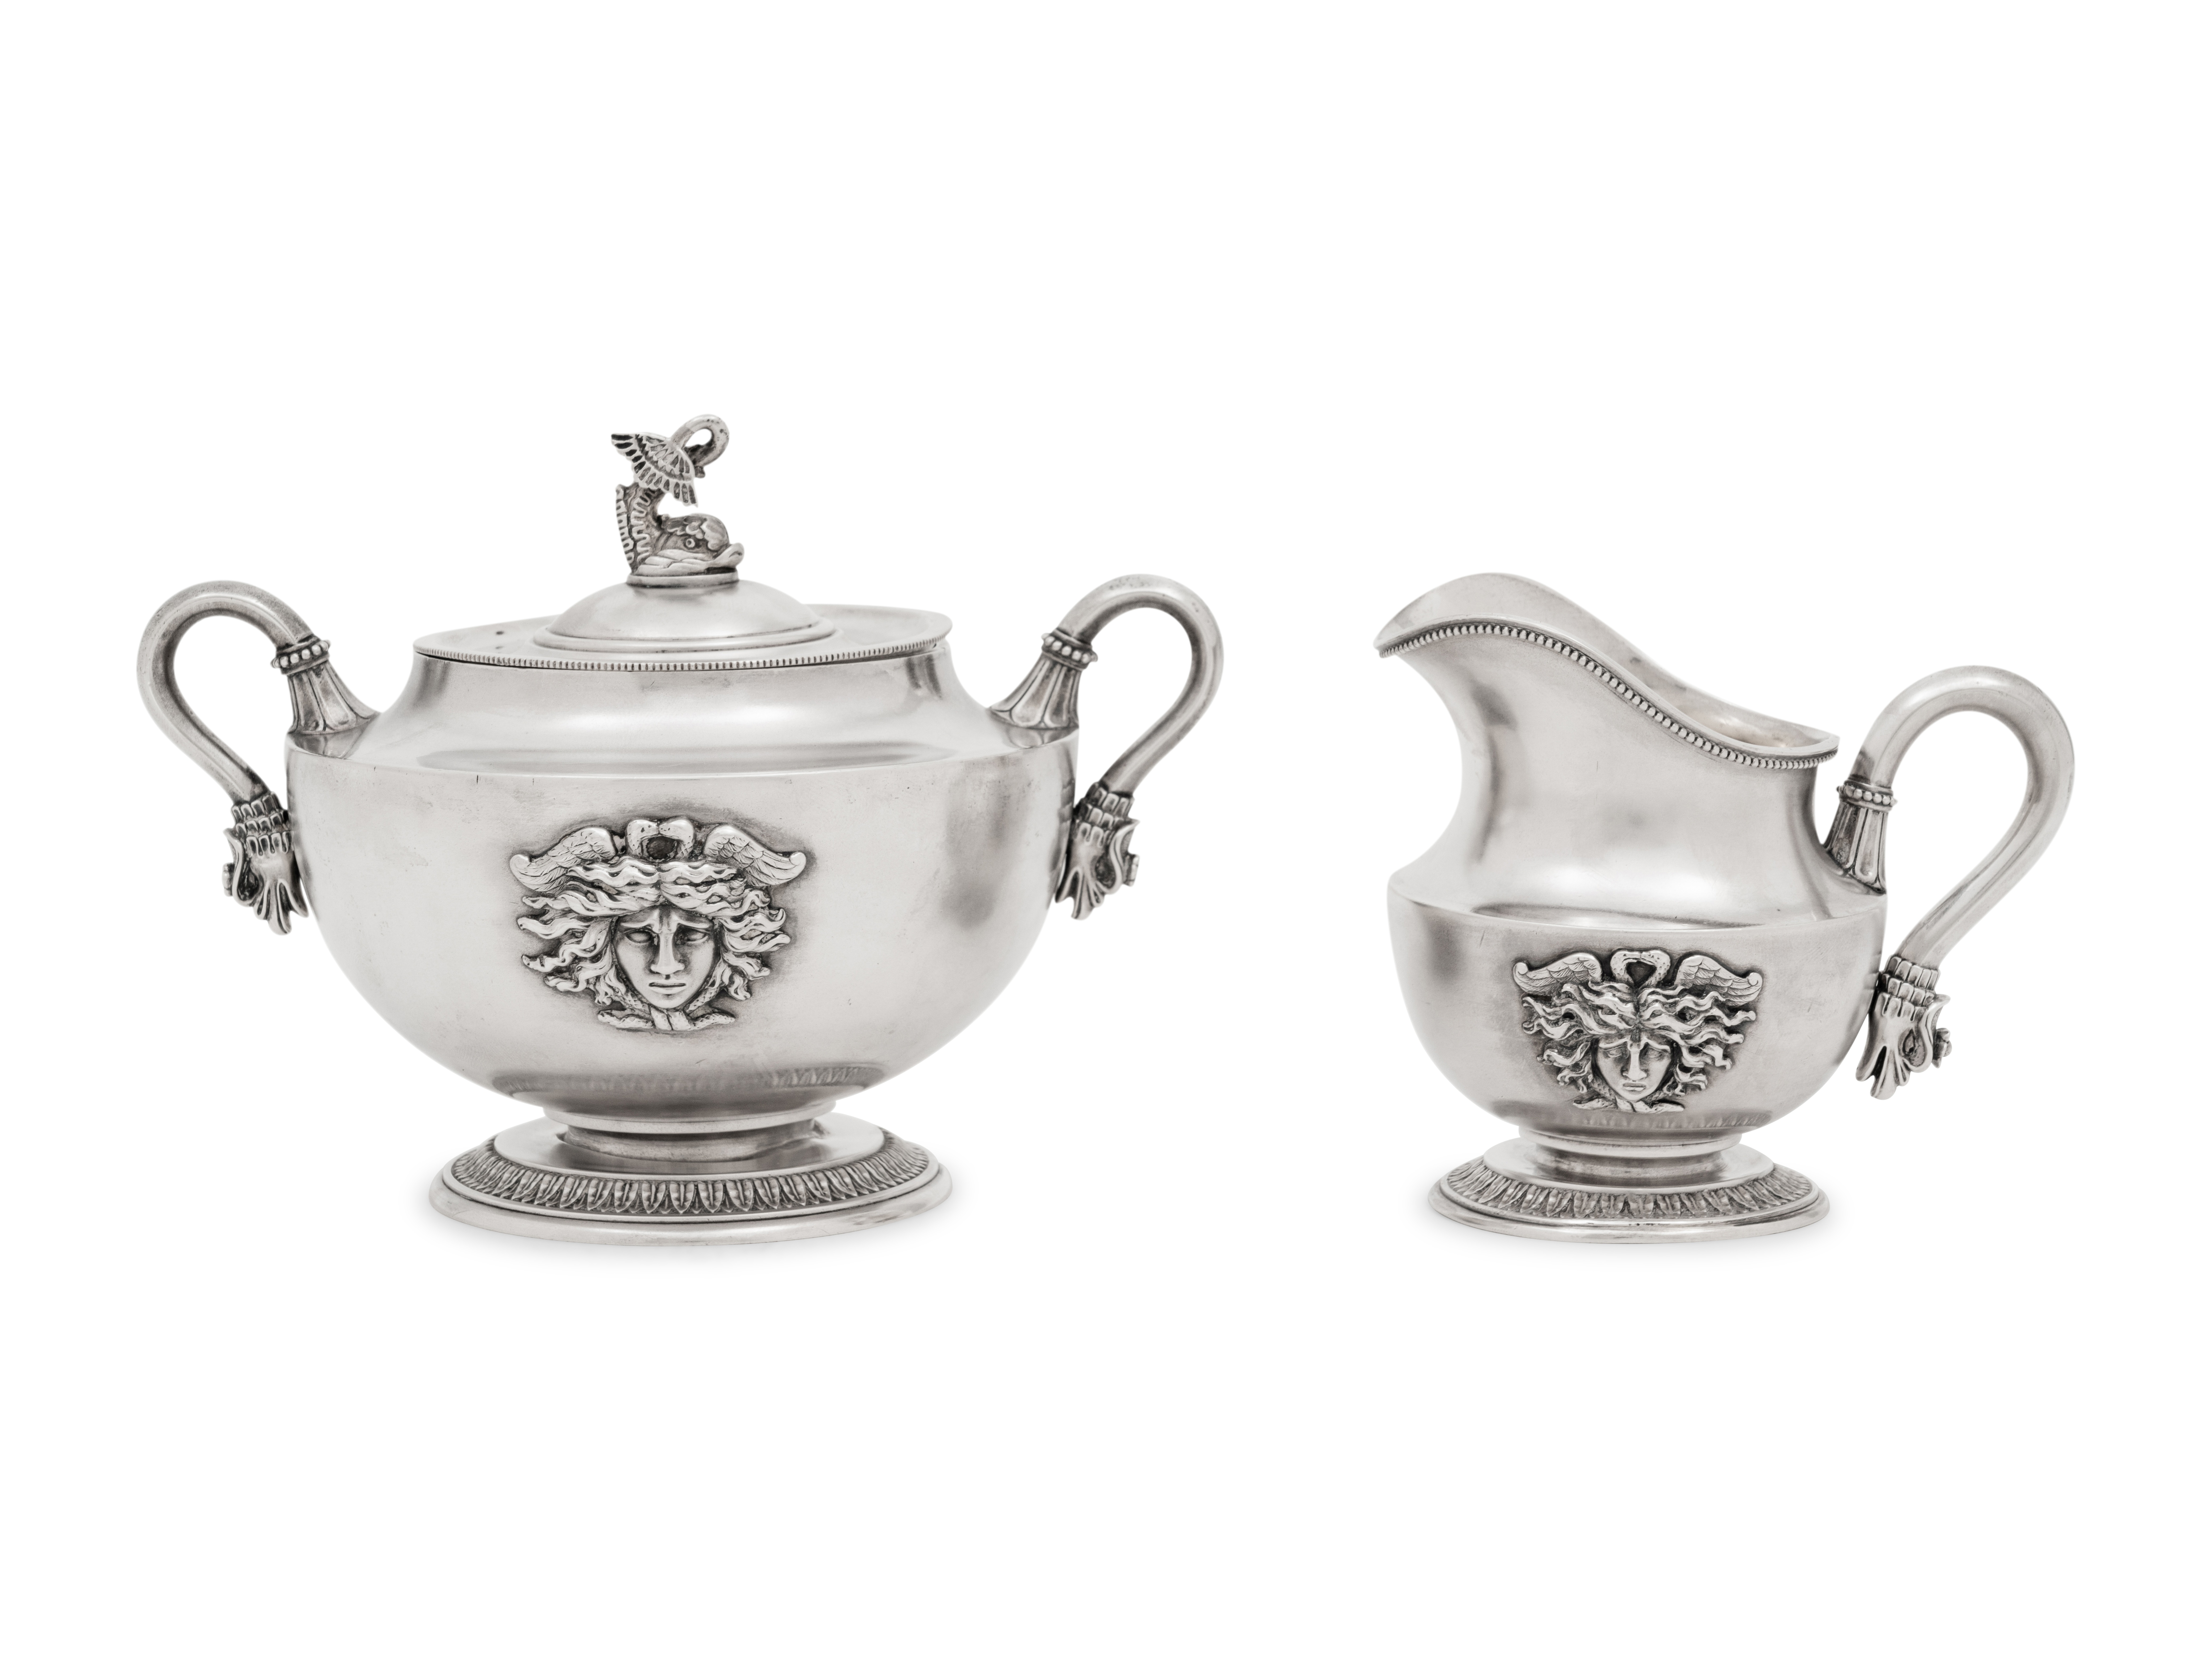 A Faberge Silver Creamer and Covered Sugar Set